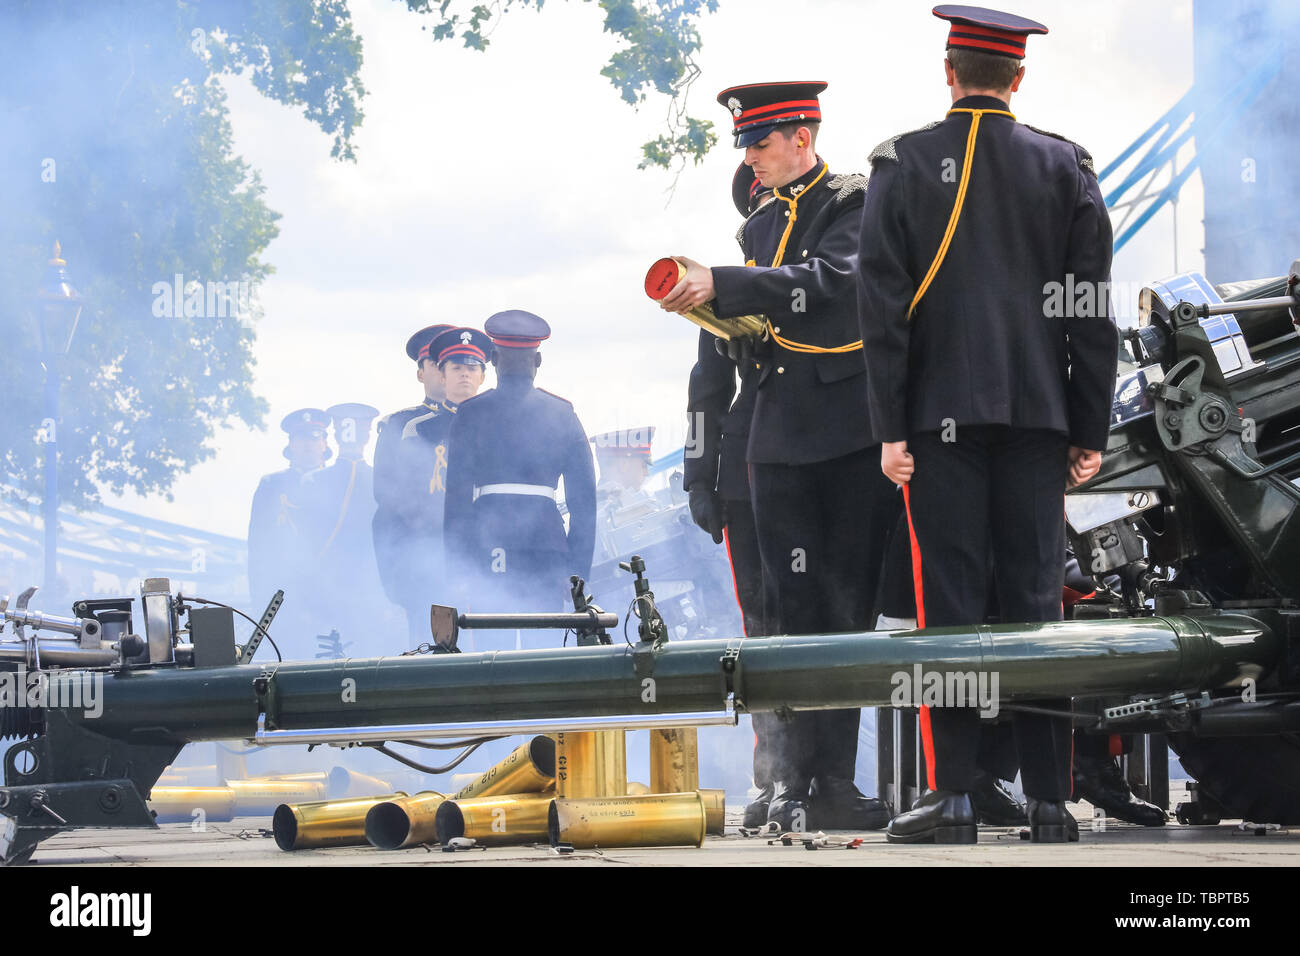 London, UK, 03rd June 2019. A 103 round gun salute by the Honourable Artillery Company at HM Tower of London is fired at midday. The 103 rounds are:  41 to mark 66 years since HM The Queen’s coronation, 41 to mark the state visit of the President of the United States, and 21 for the City of London. Credit: Imageplotter/Alamy Live News Stock Photo